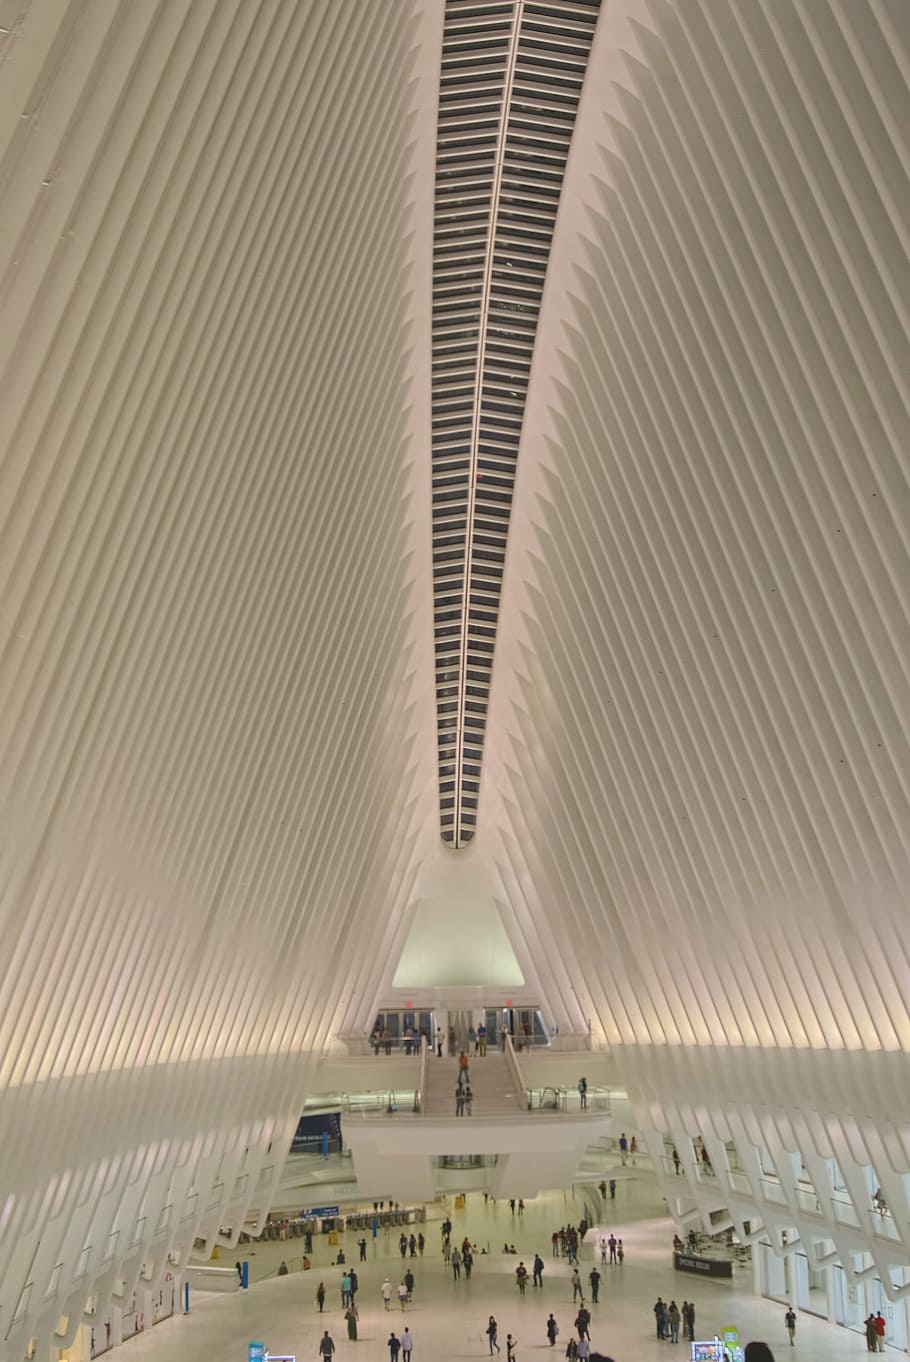 new york city, manhattan, transit, station, oculus, architecture, group of people, built structure, real people, crowd